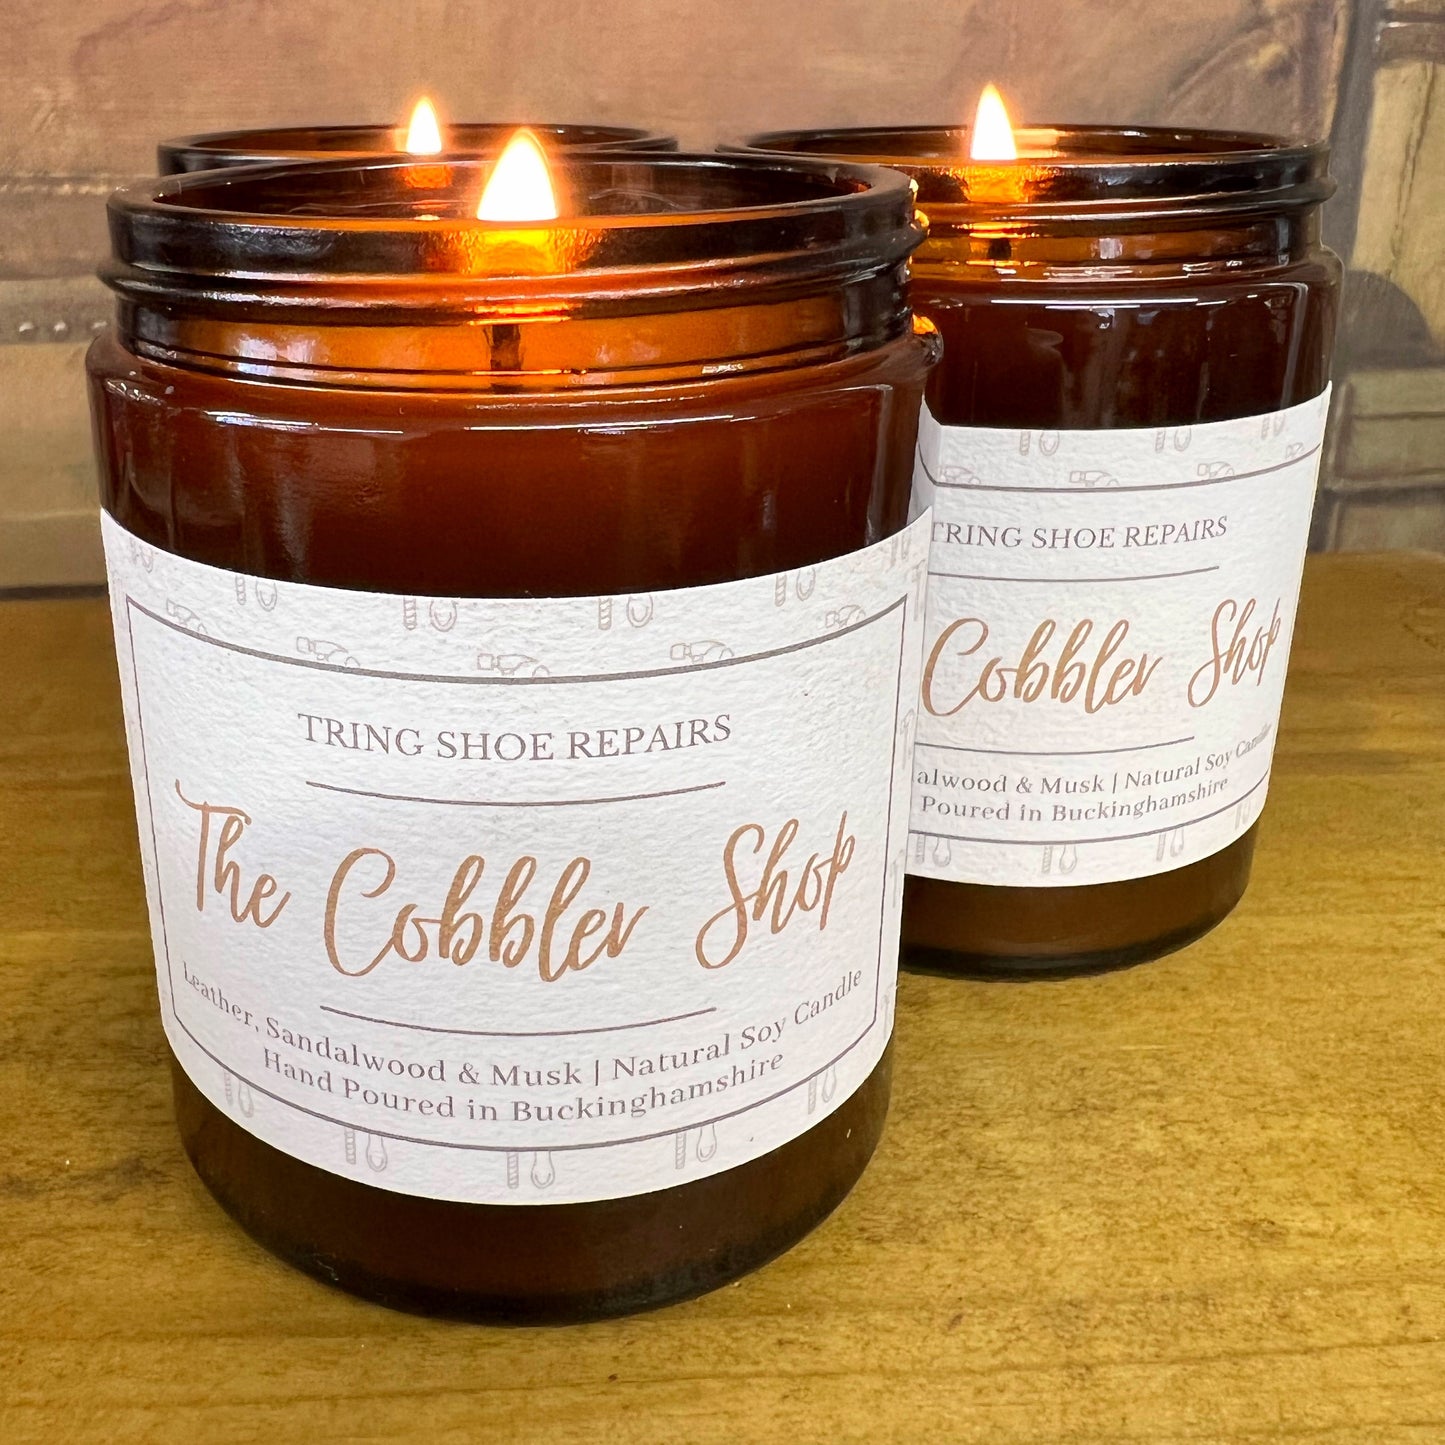 'The Cobbler Shop' Signature Leather Scented Candle